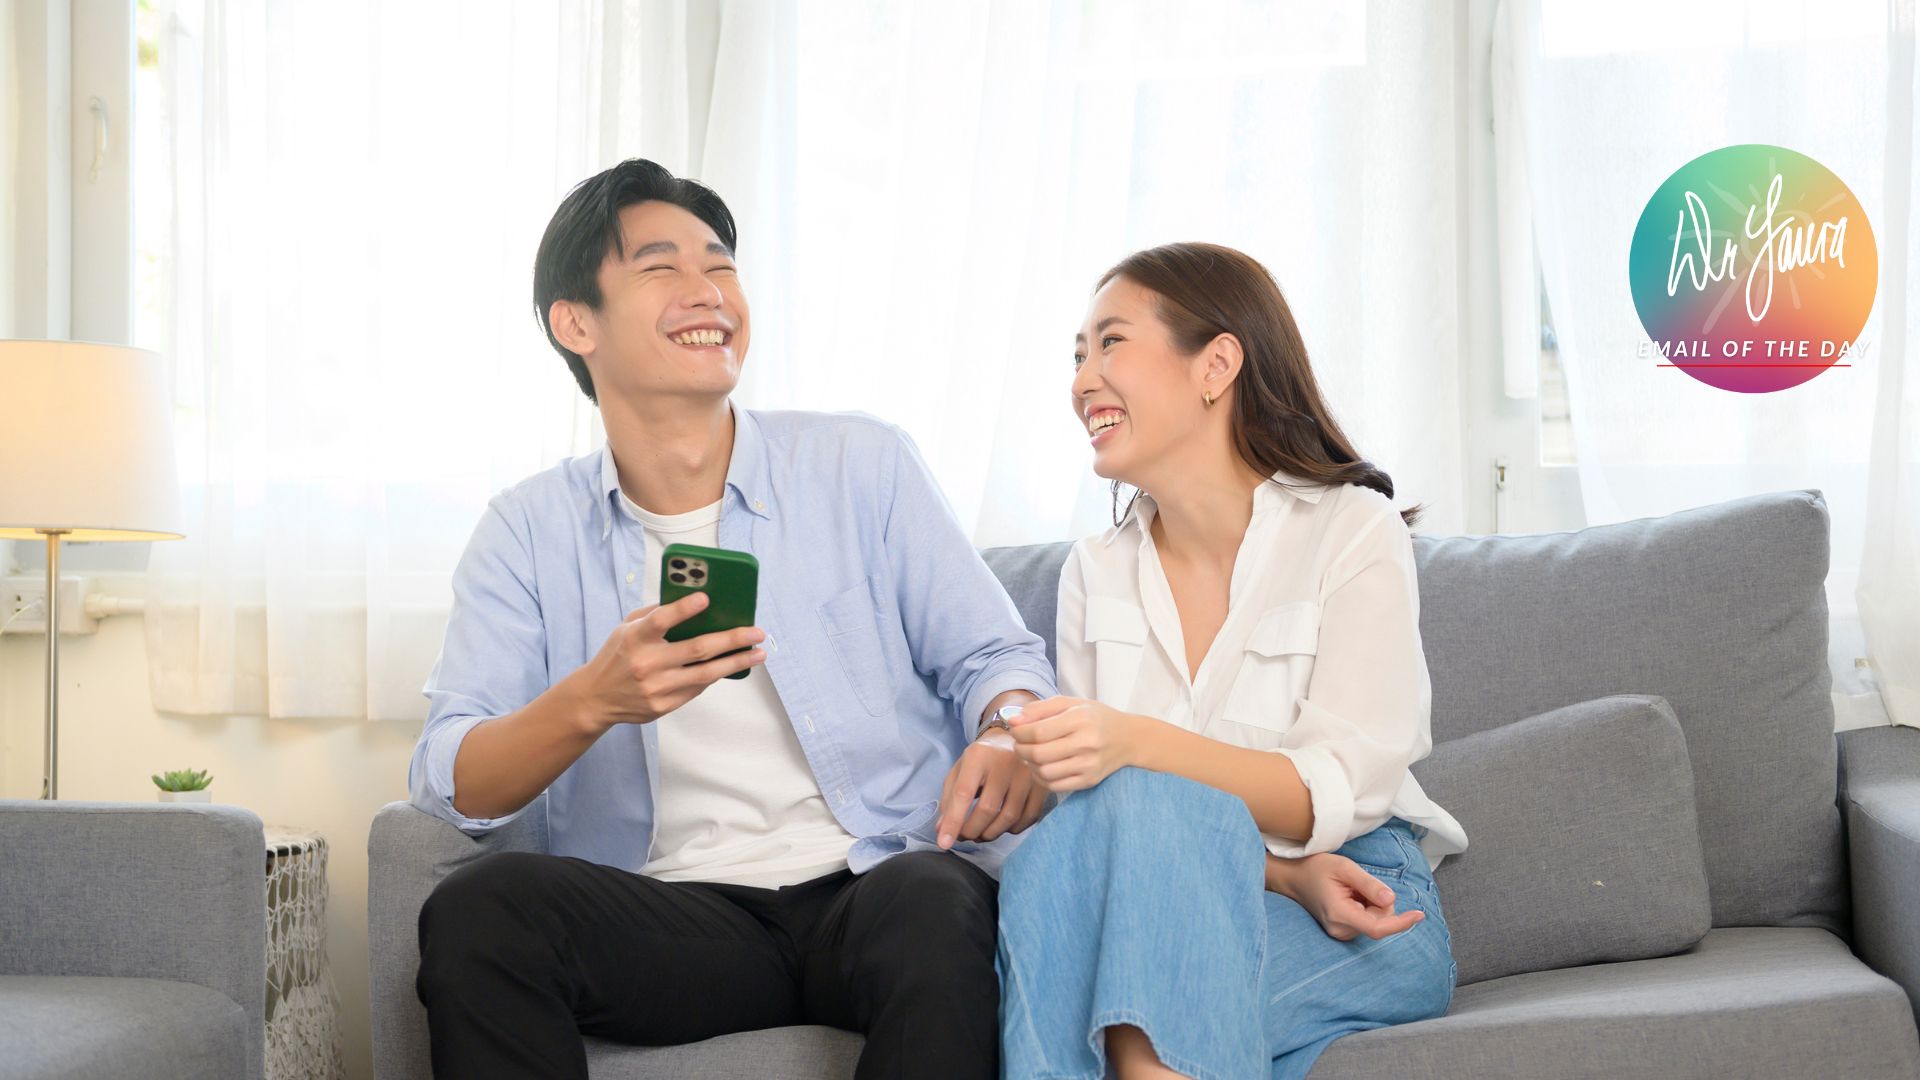 Man in blue button-up laughs while holds his phone and placing his arm on the legs of woman wearing white blouse